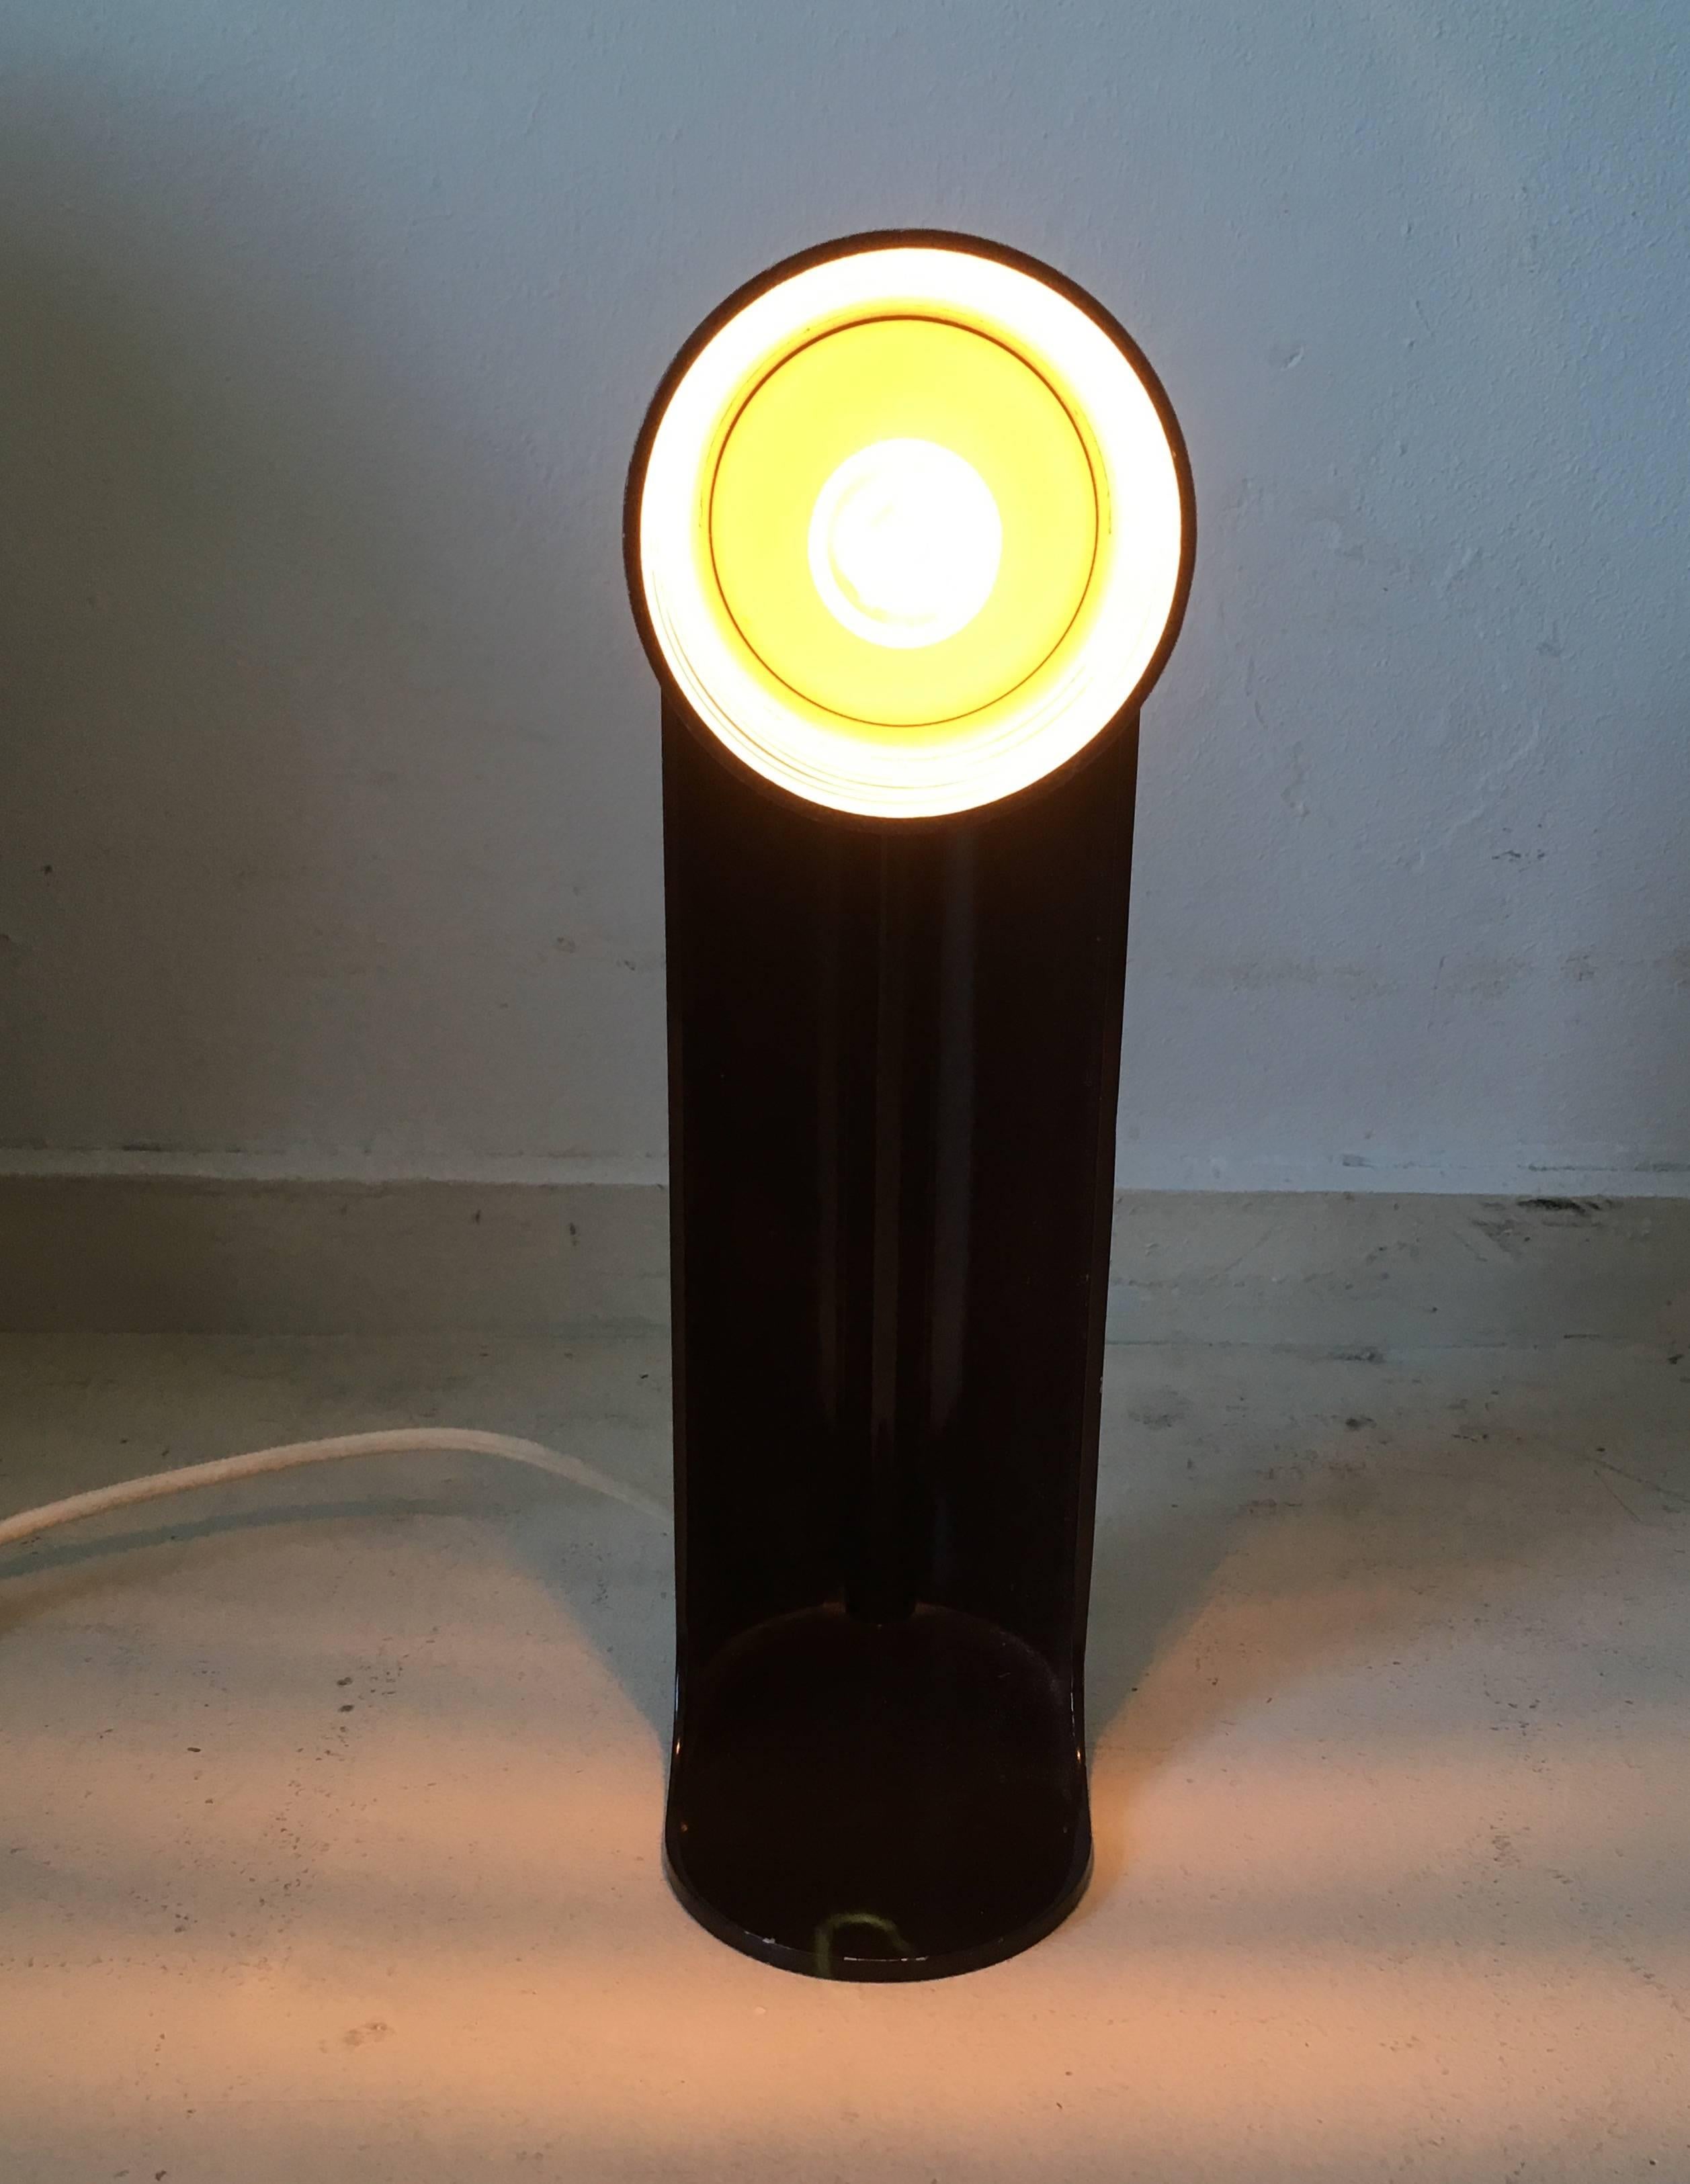 Italian, Space Age Desk Lamp, Model Flip Top, by R. Carruthers for Leuka, 1970s For Sale 3